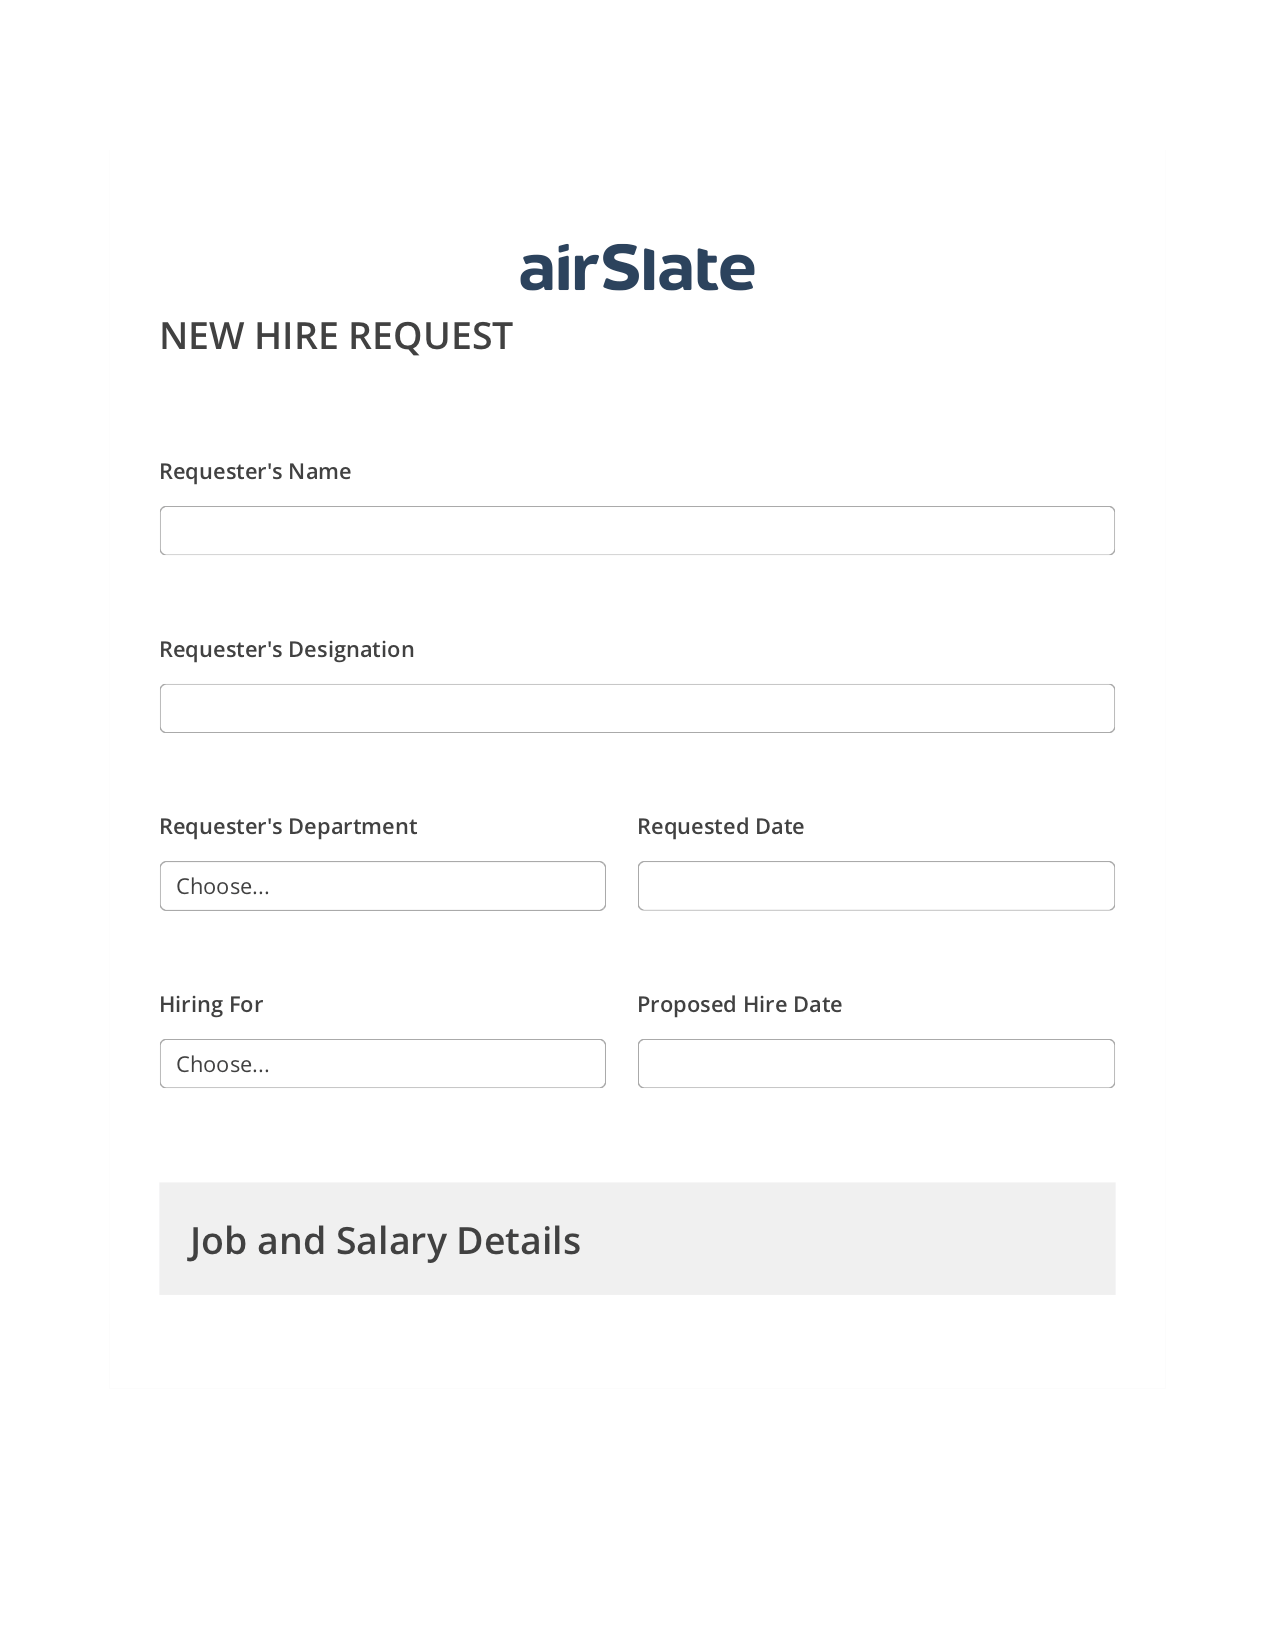 Hiring Request Workflow Pre-fill from Office 365 Excel Bot, Send a Slate with Roles Bot, Export to Excel 365 Bot